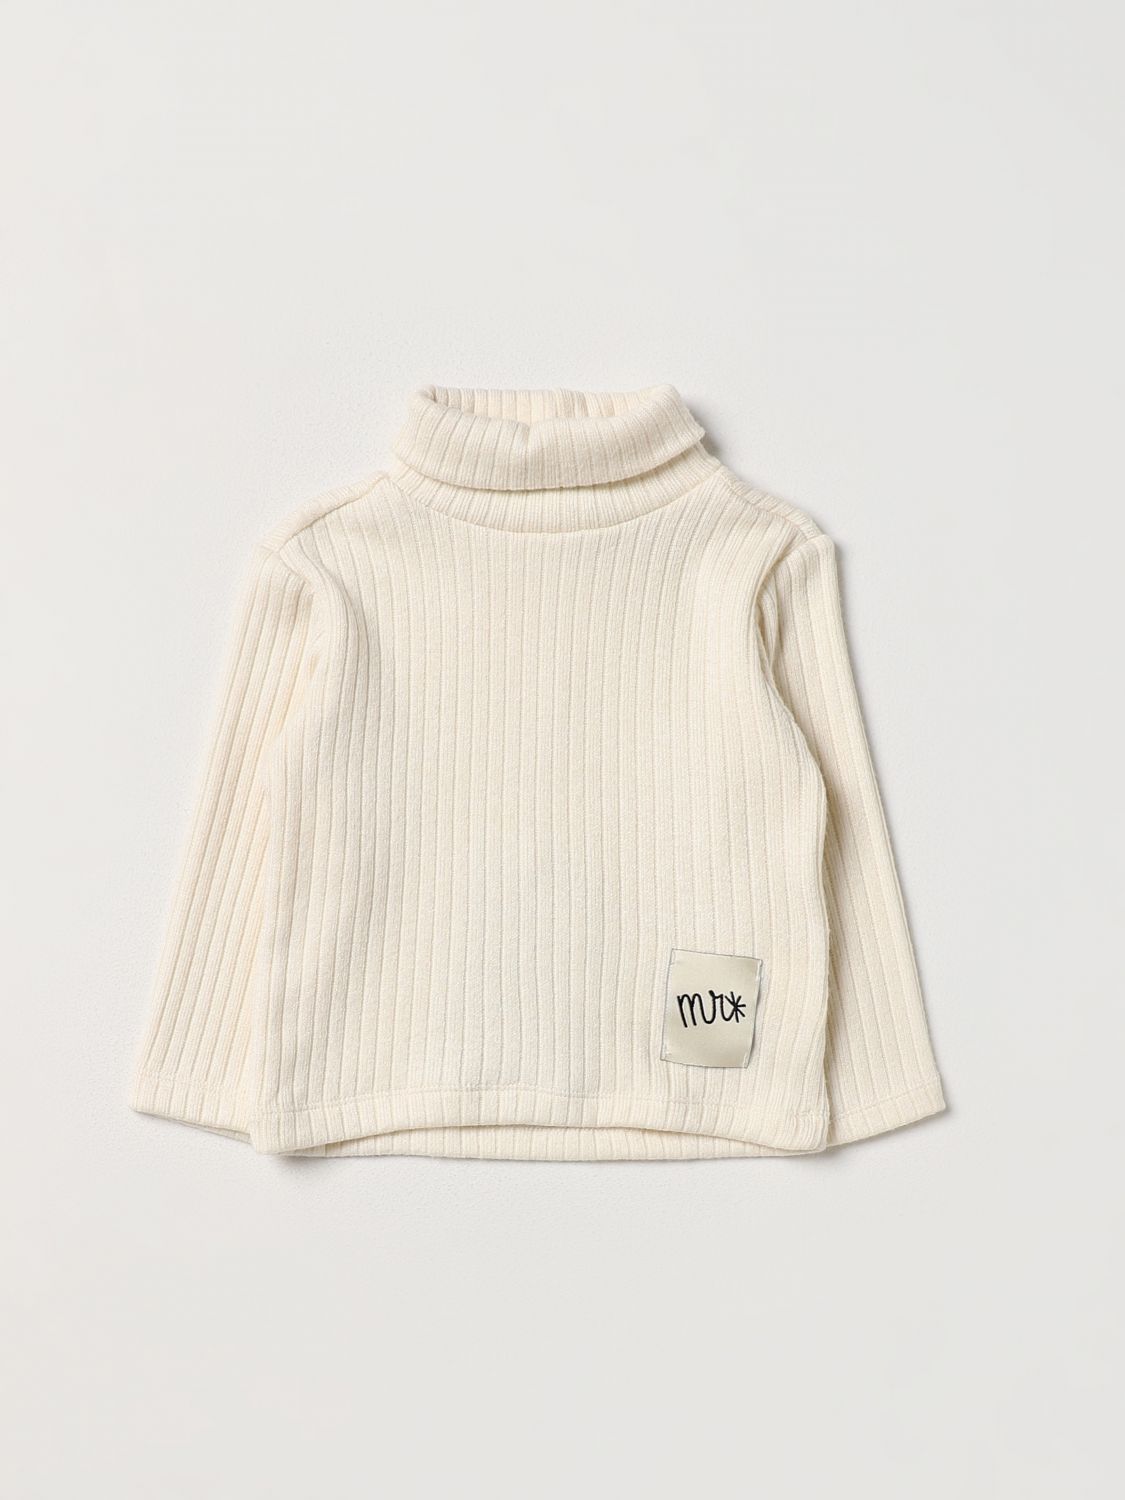 Manuel Ritz Babies' Pullover  Kinder Farbe Weiss In White